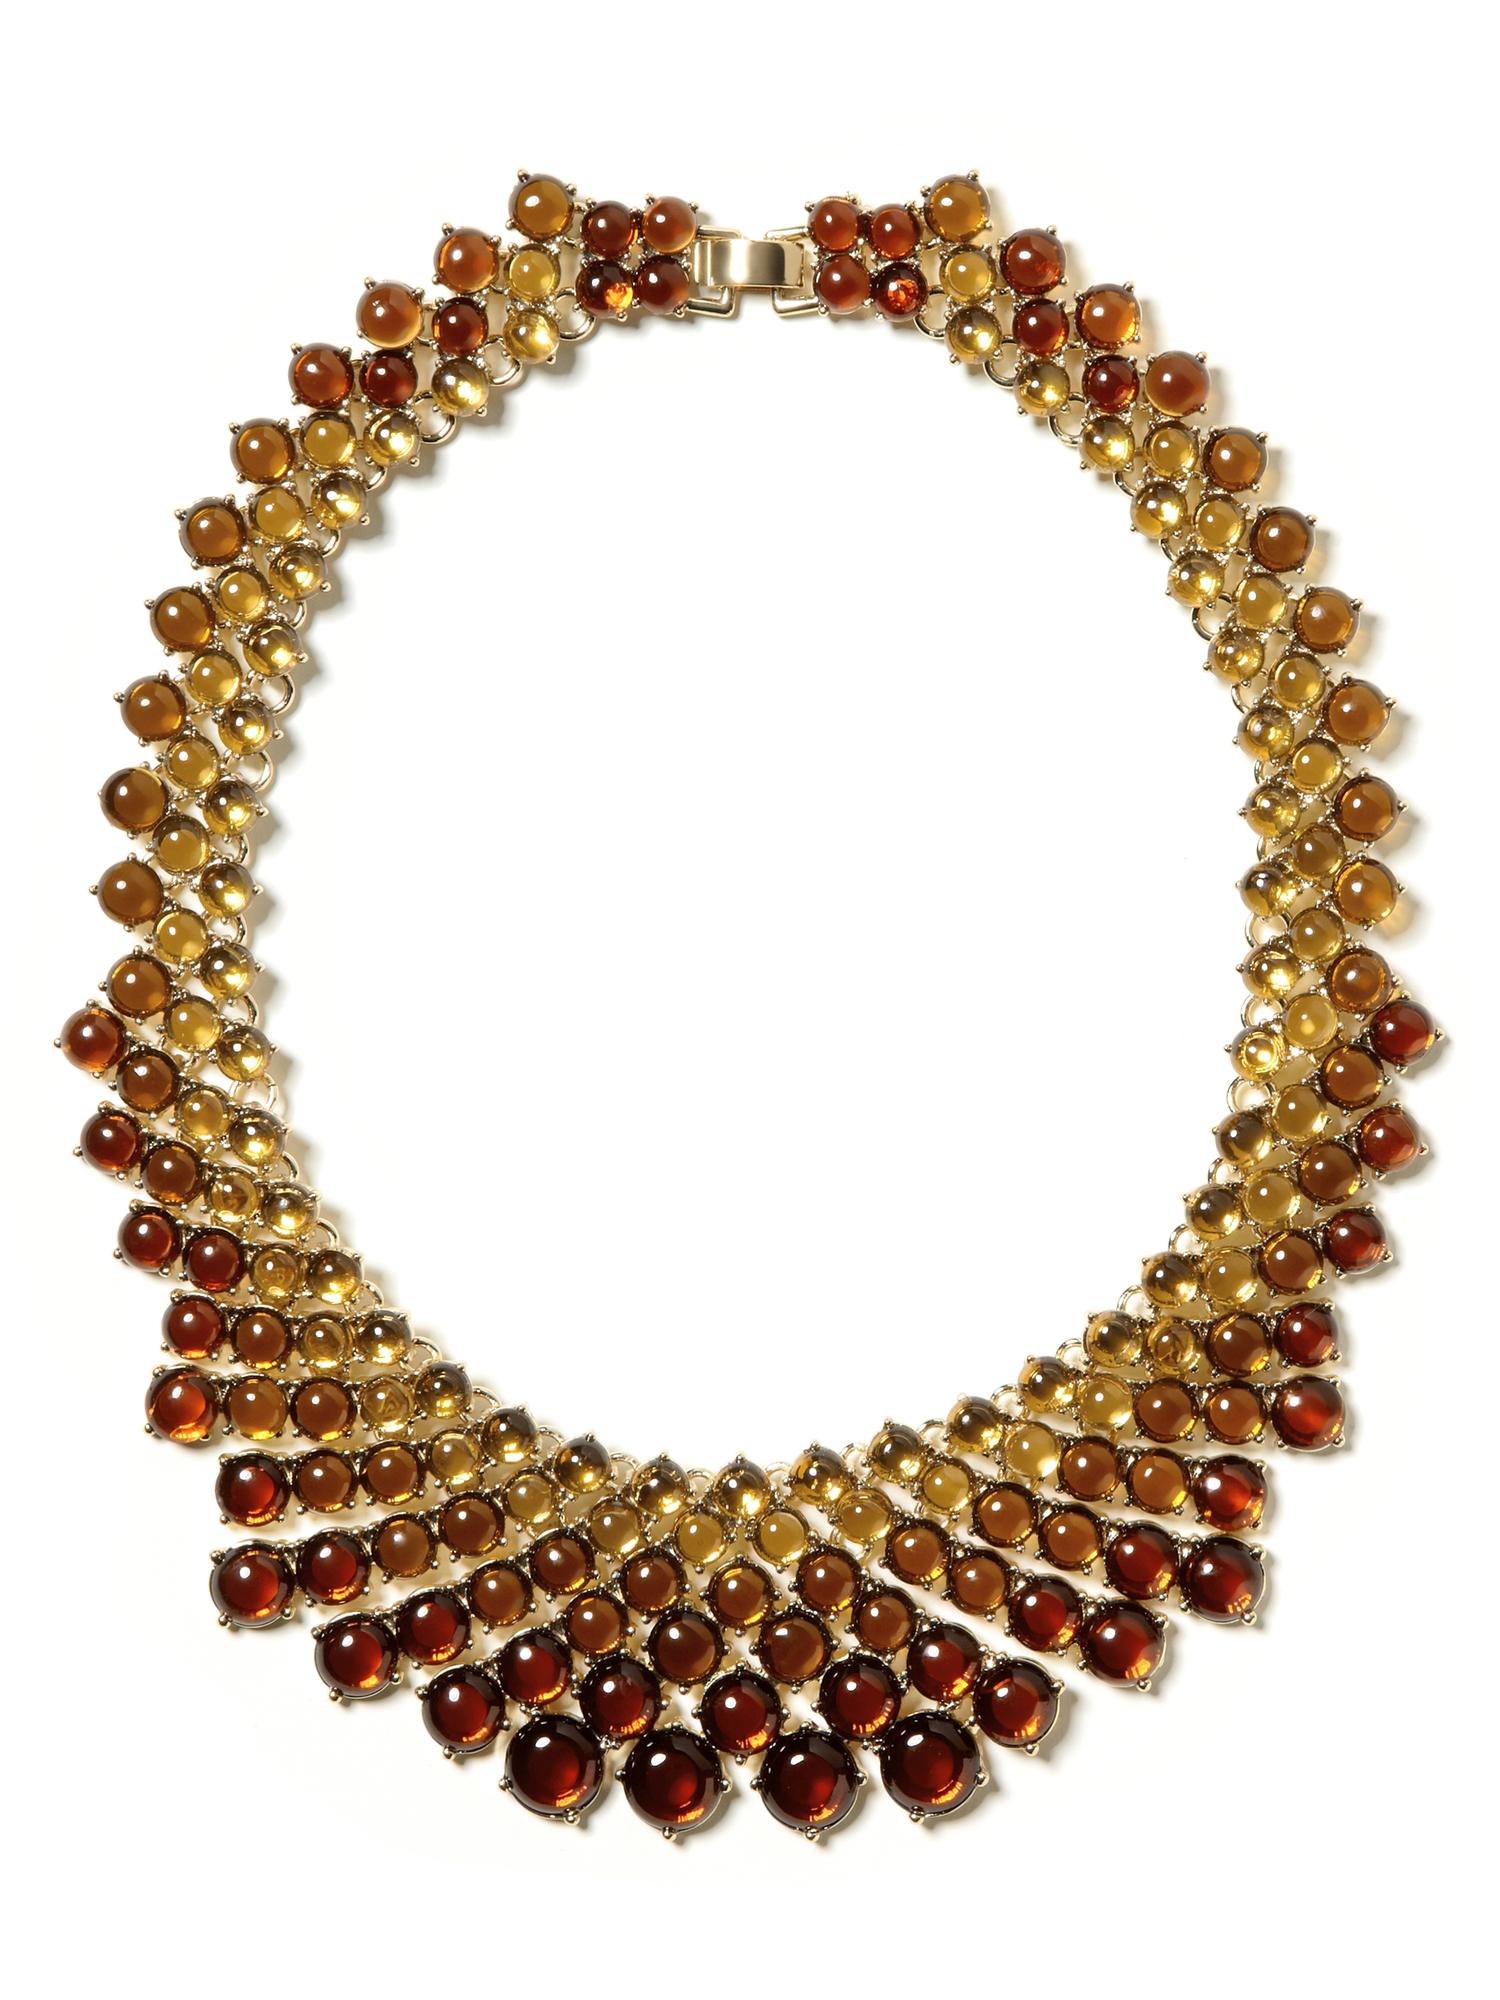 Ombre amber necklace